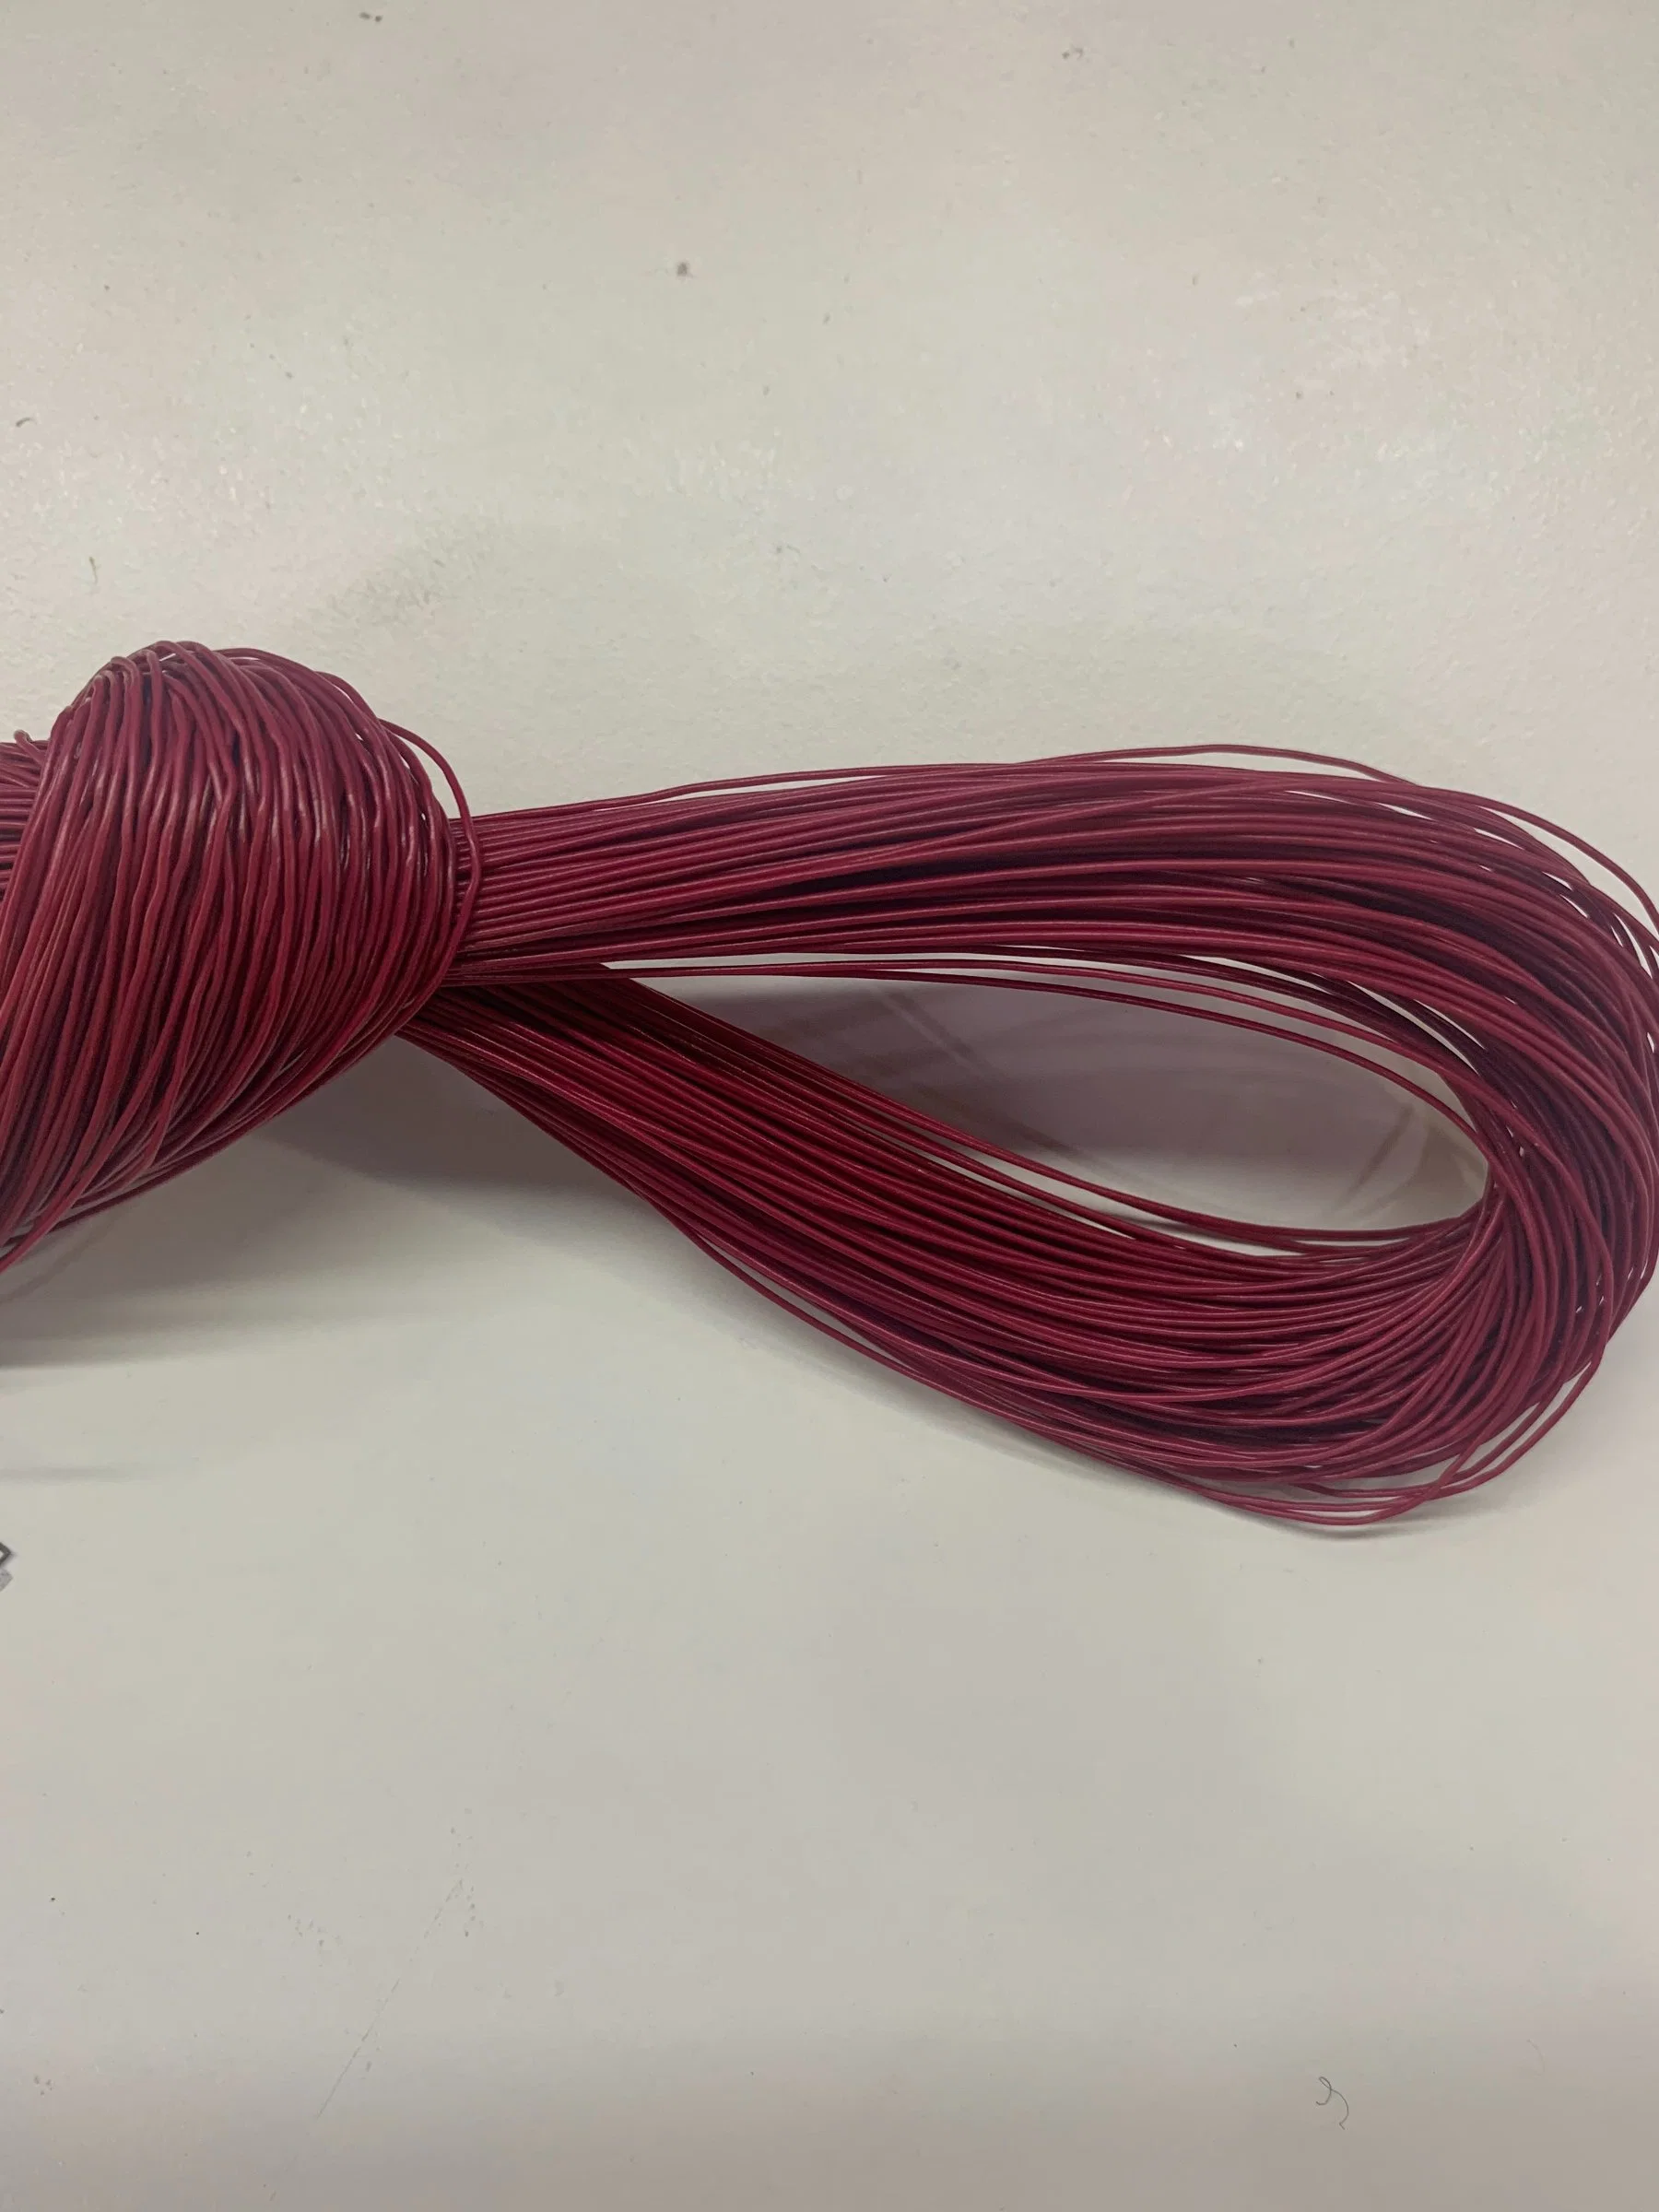 China Manufacturer 500d 800d 1000d PVC Coated Textured Polyester Yarn